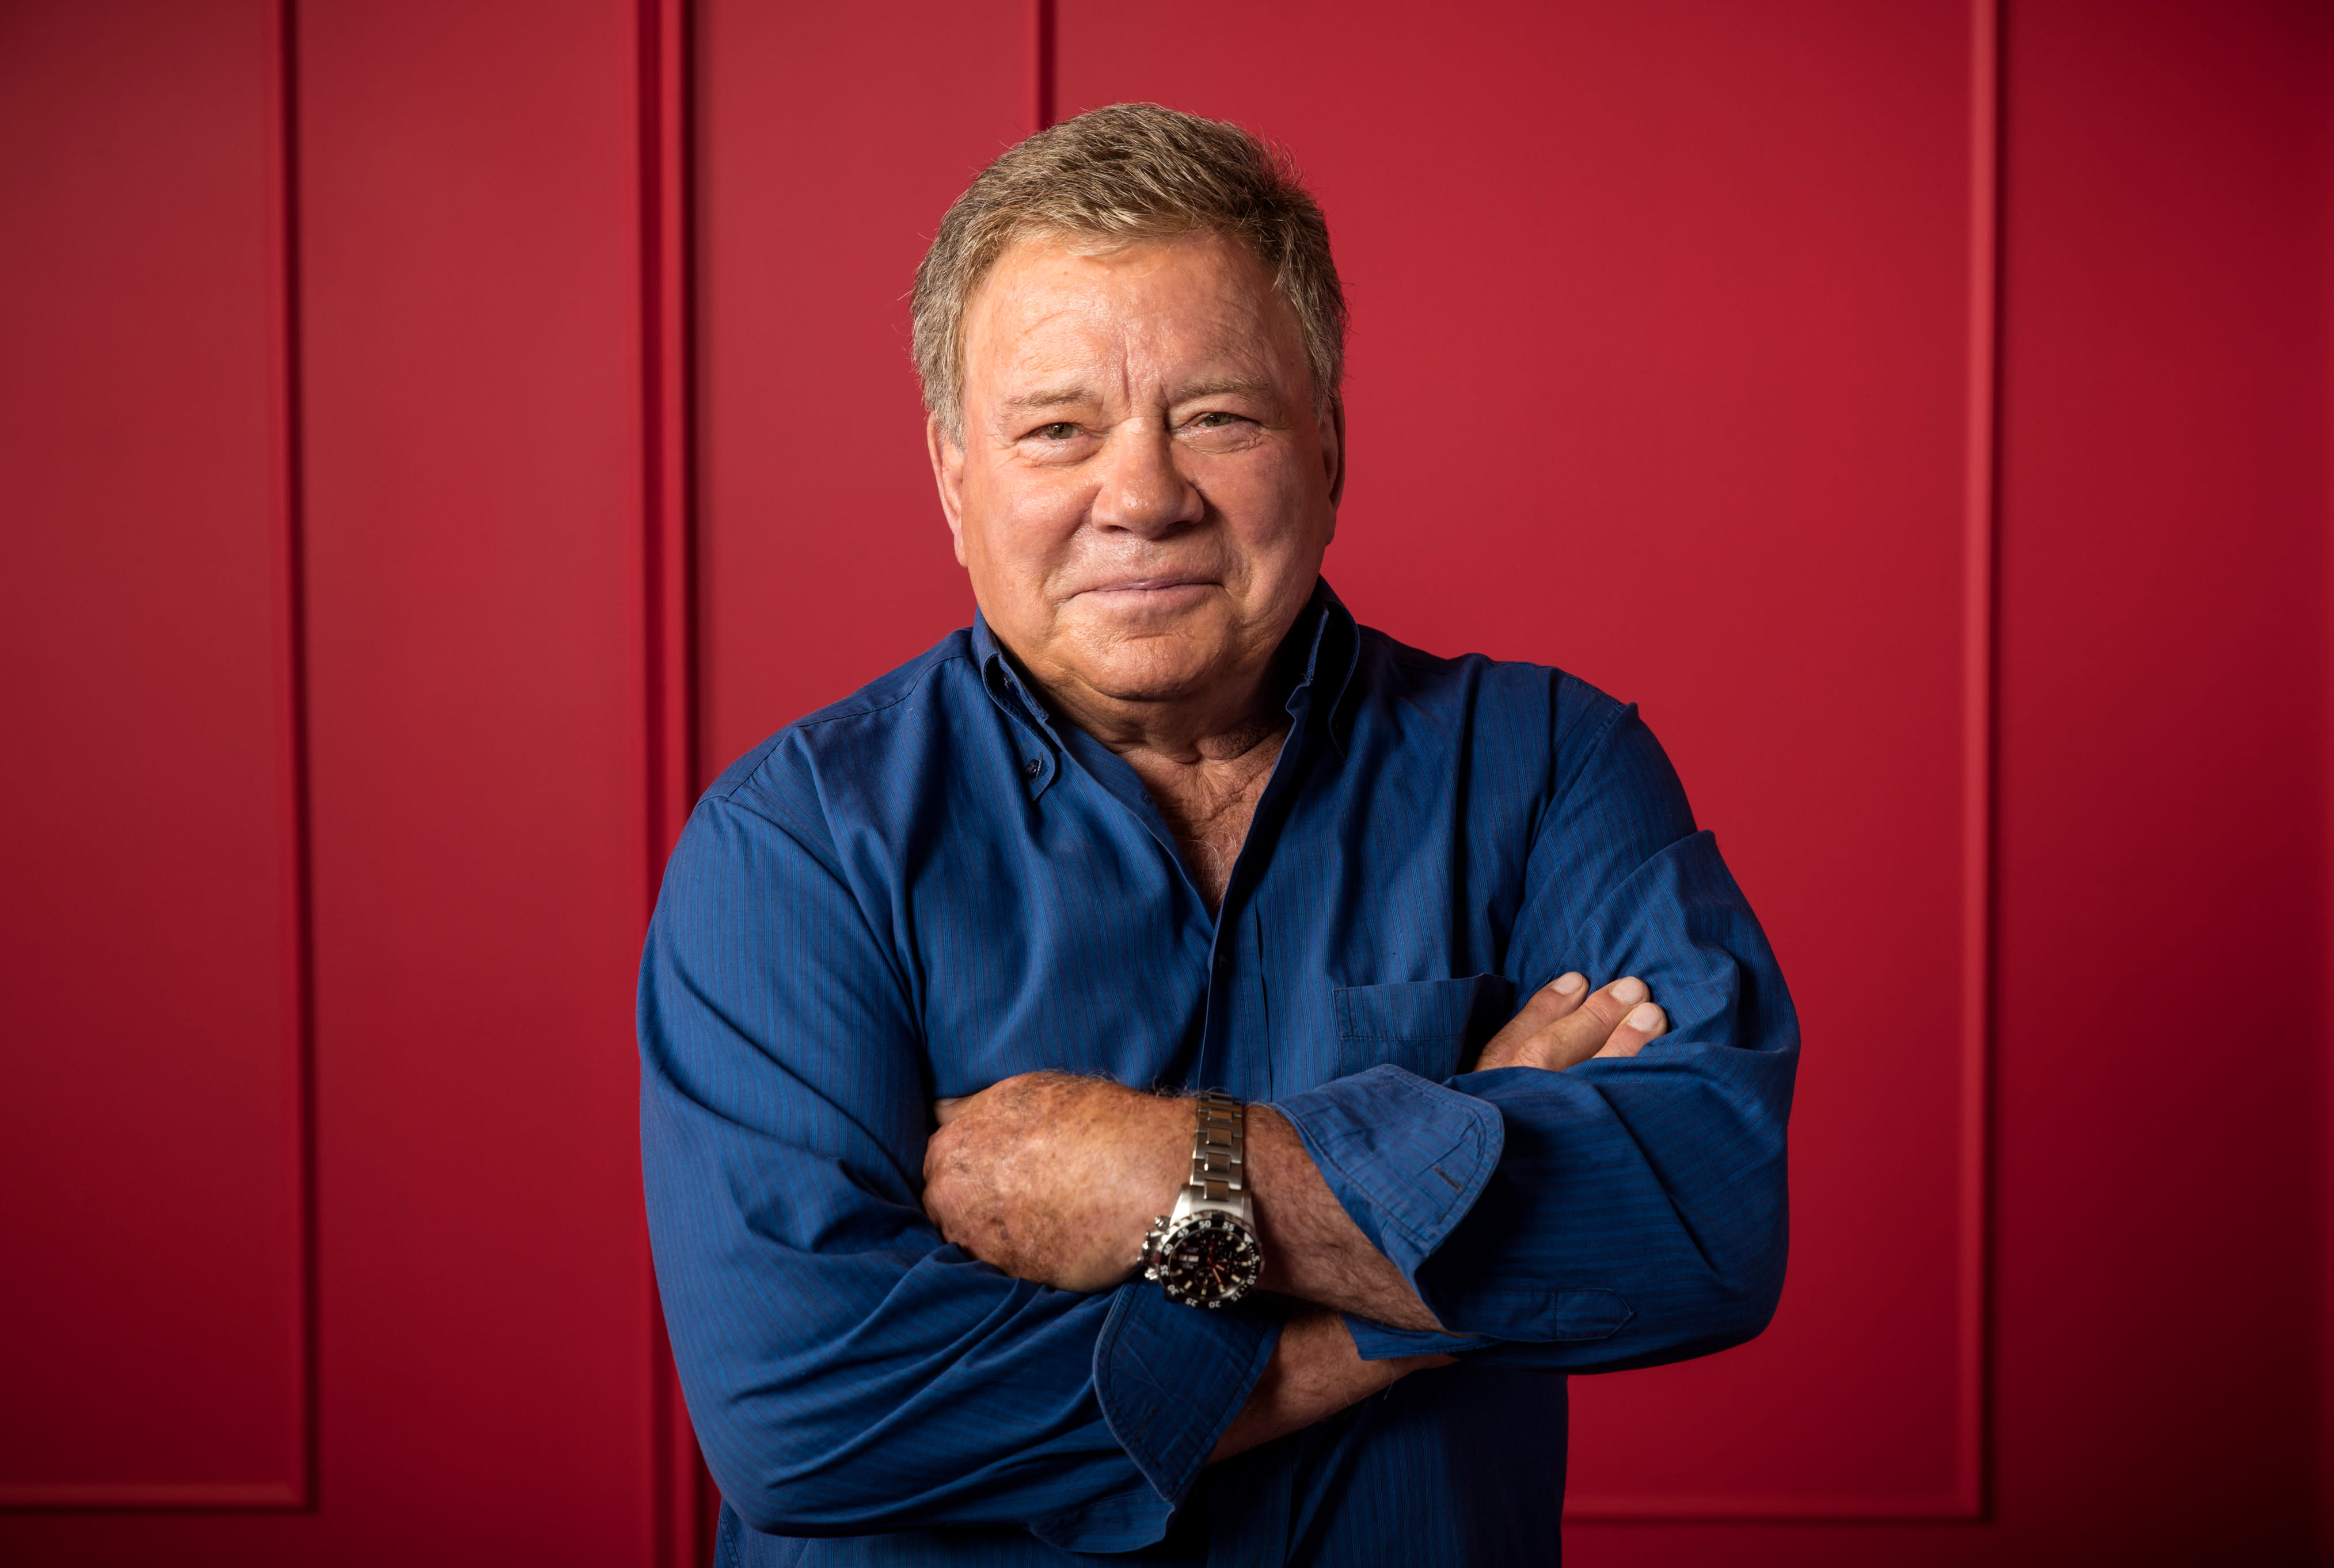 William Shatner stands by 'Baby, It's Cold Outside'